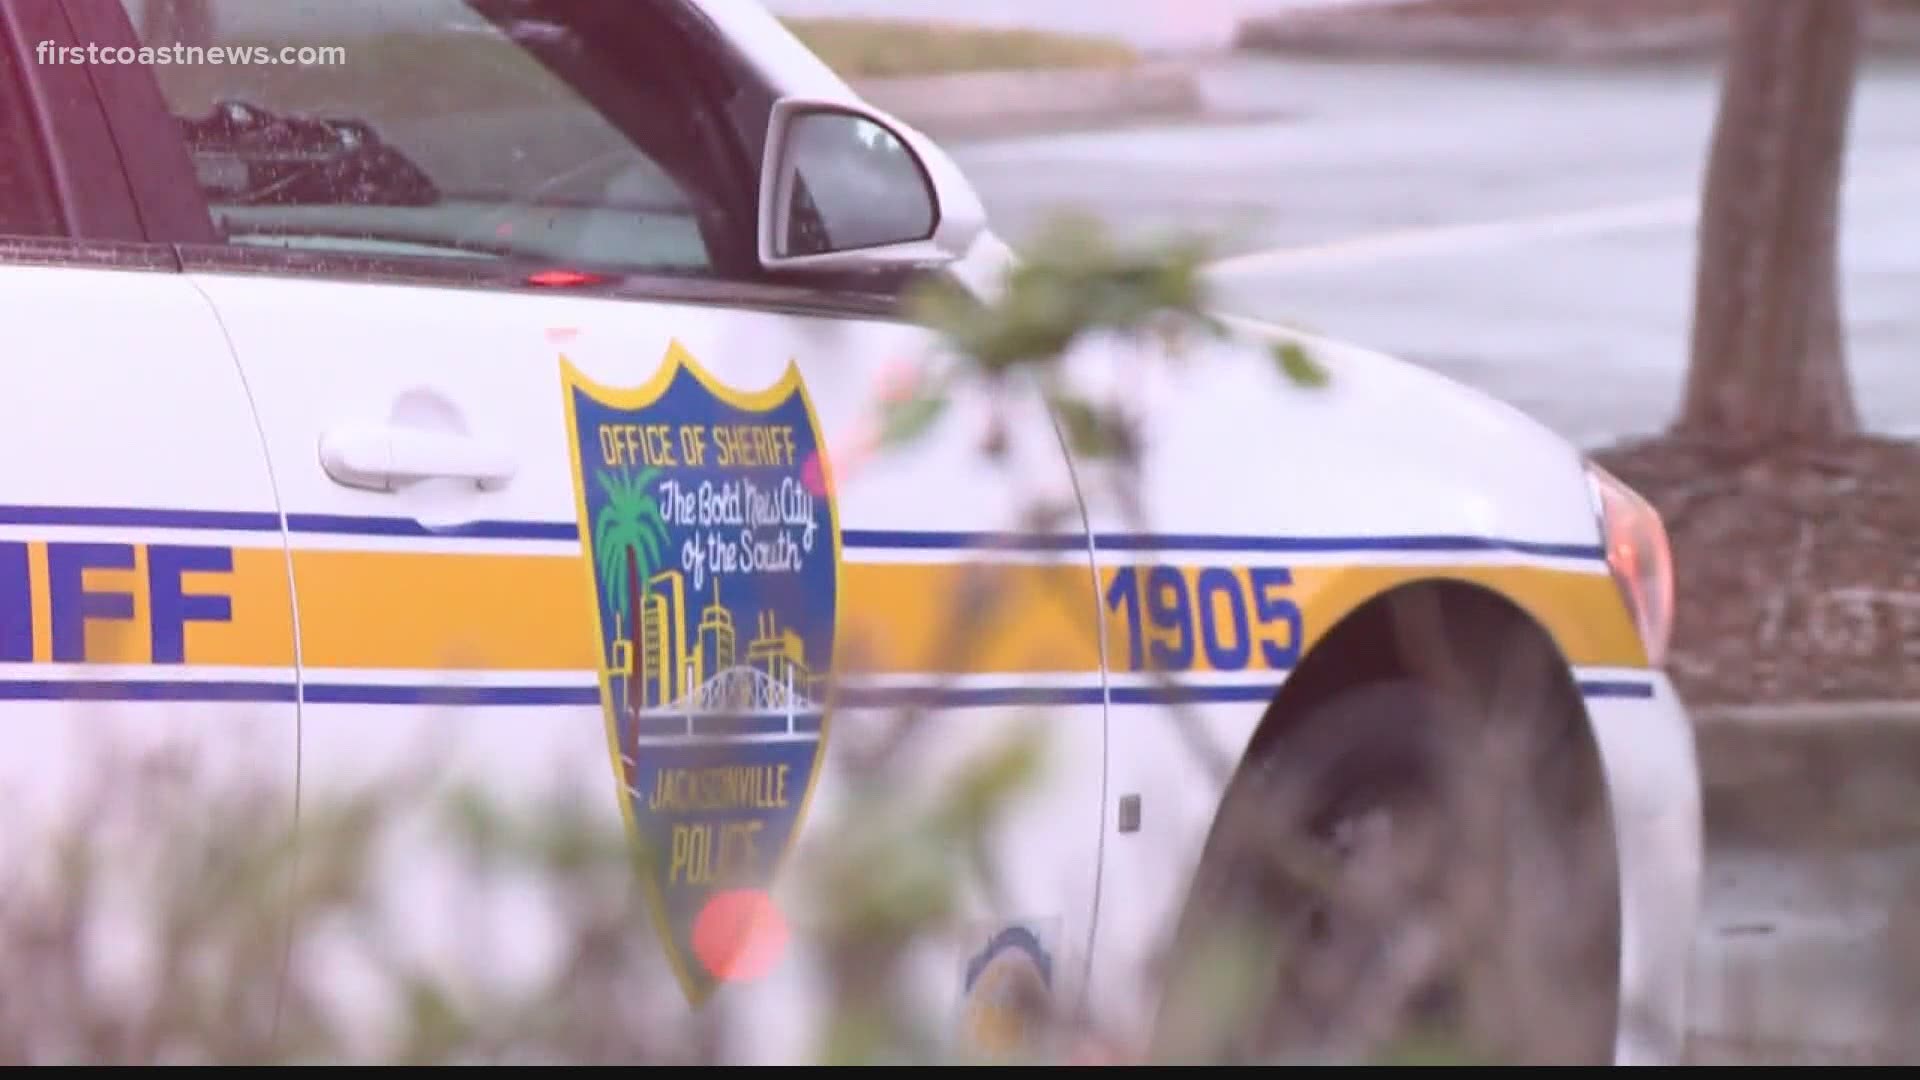 JSO Assistant Chief Lakesha Burton said more than 600 firearms have been stolen from vehicles in Jacksonville this year